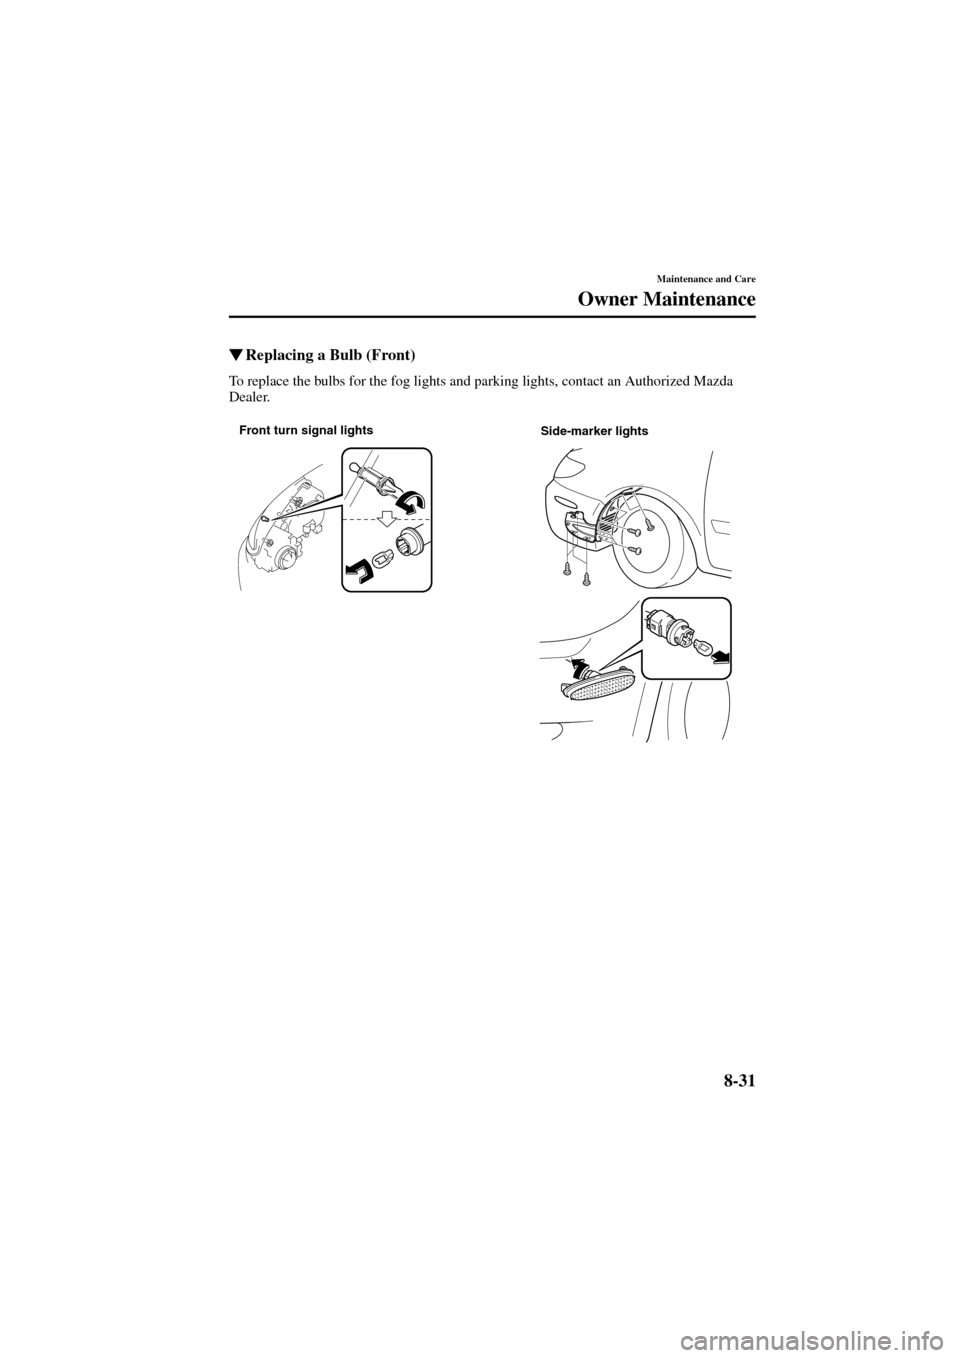 MAZDA MODEL 6 2004  Owners Manual (in English) 8-31
Maintenance and Care
Owner Maintenance
Form No. 8R29-EA-02I
Replacing a Bulb (Front)
To replace the bulbs for the fog lights and parking lights, contact an Authorized Mazda 
Dealer.
Front turn s